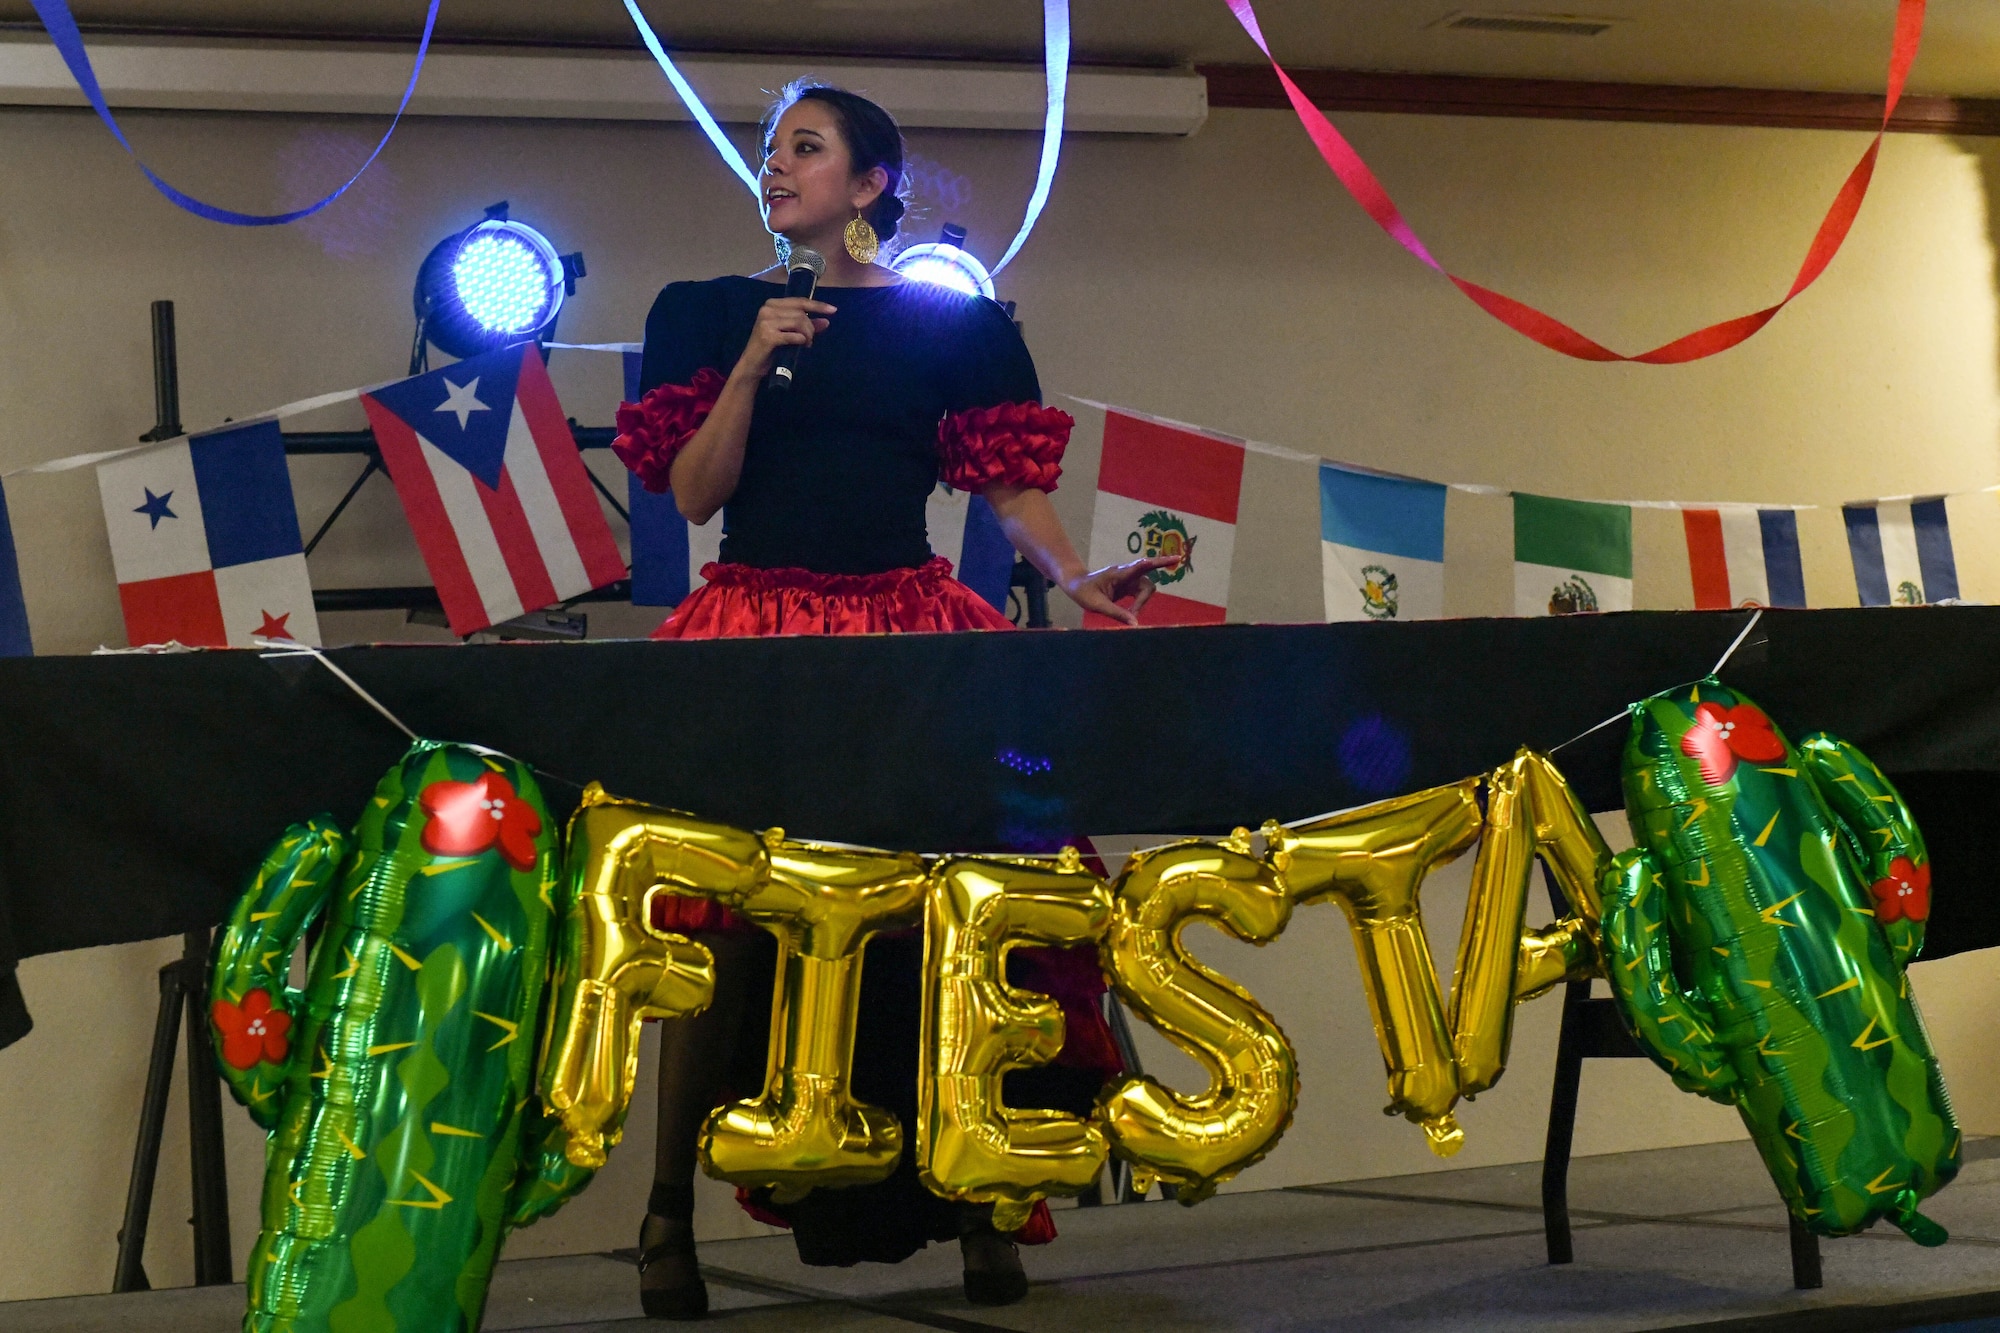 U.S. Air Force Capt. Isabella Zamarron, 97th Logistics Readiness Squadron fuels management flight commander, speaks at a fiesta on Altus Air Force Base, Oklahoma, October 15, 2021. Before introducing the dance group, Zamarron spoke about the significance of celebrating Hispanic Heritage Month. (U.S. Air Force photo by Airman 1st Class Trenton Jancze)